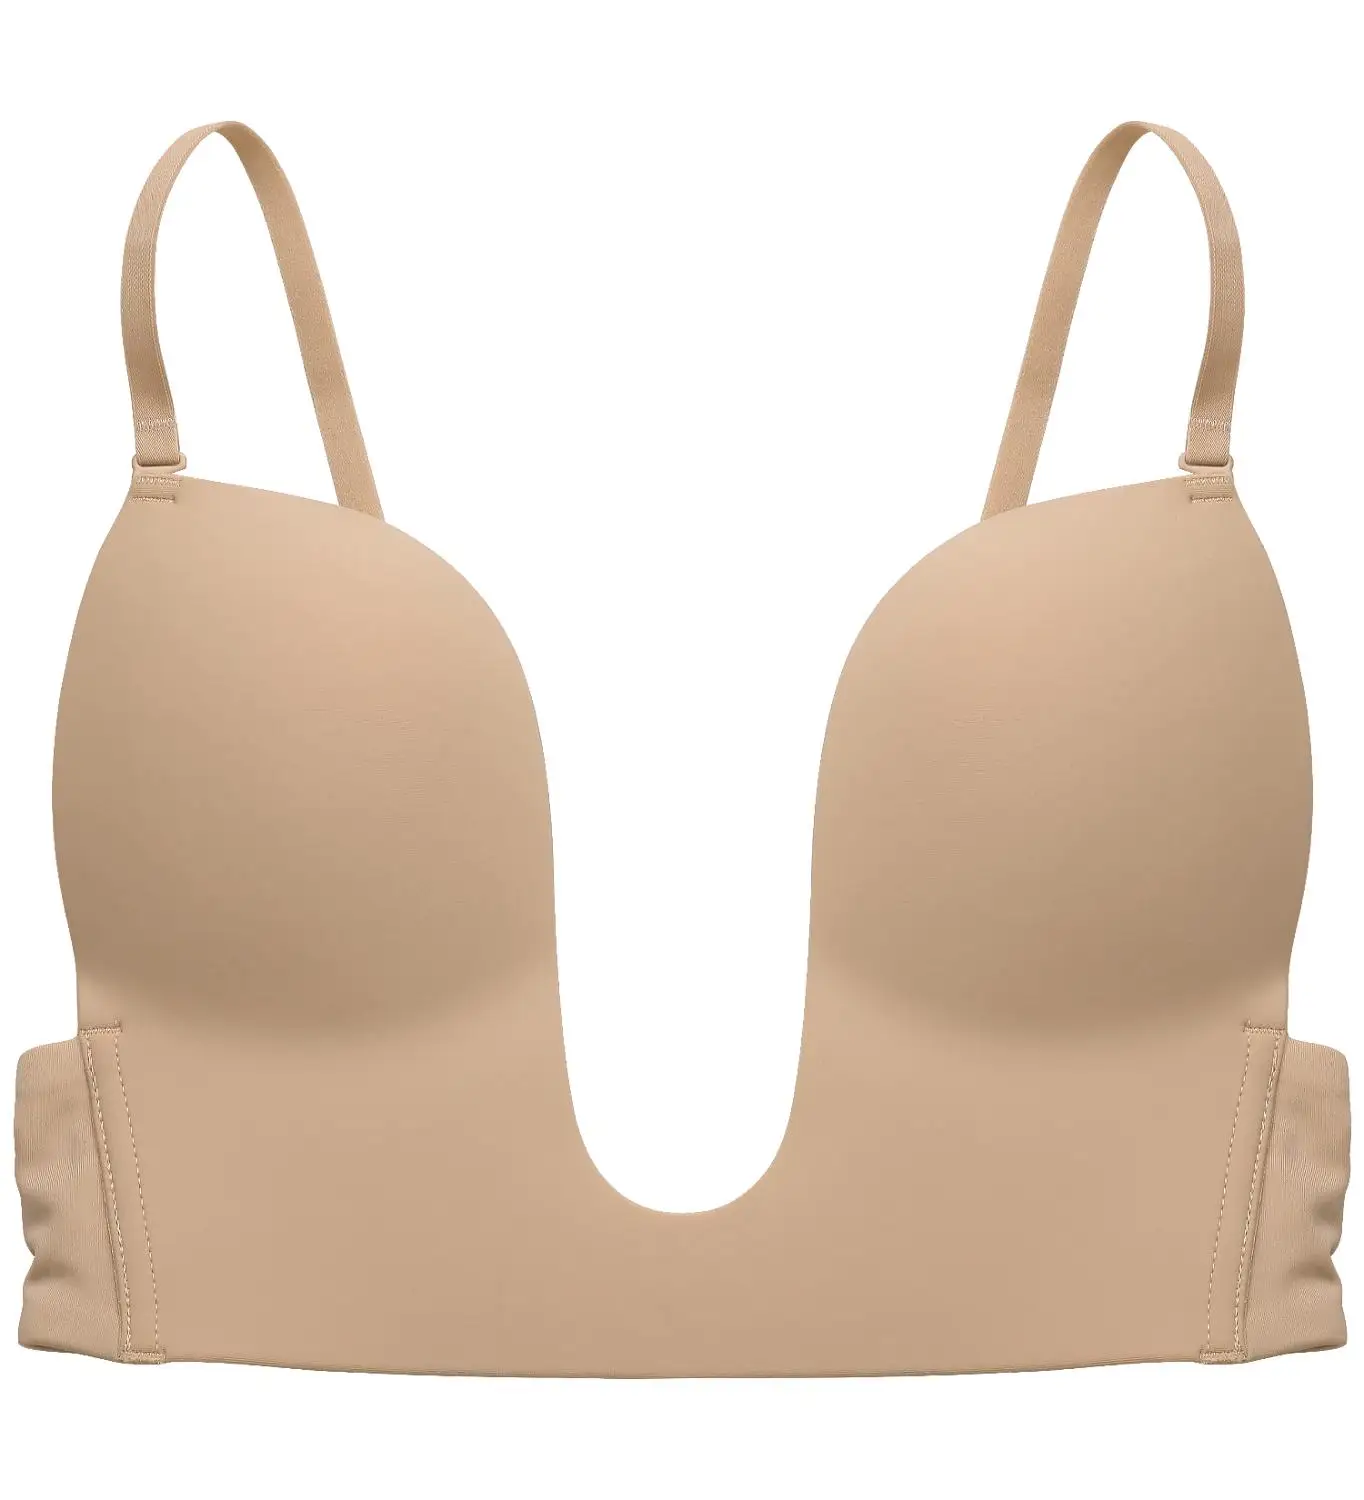 Plus Size Low Cut Bra for Women Sexy Convertible Smooth Contour